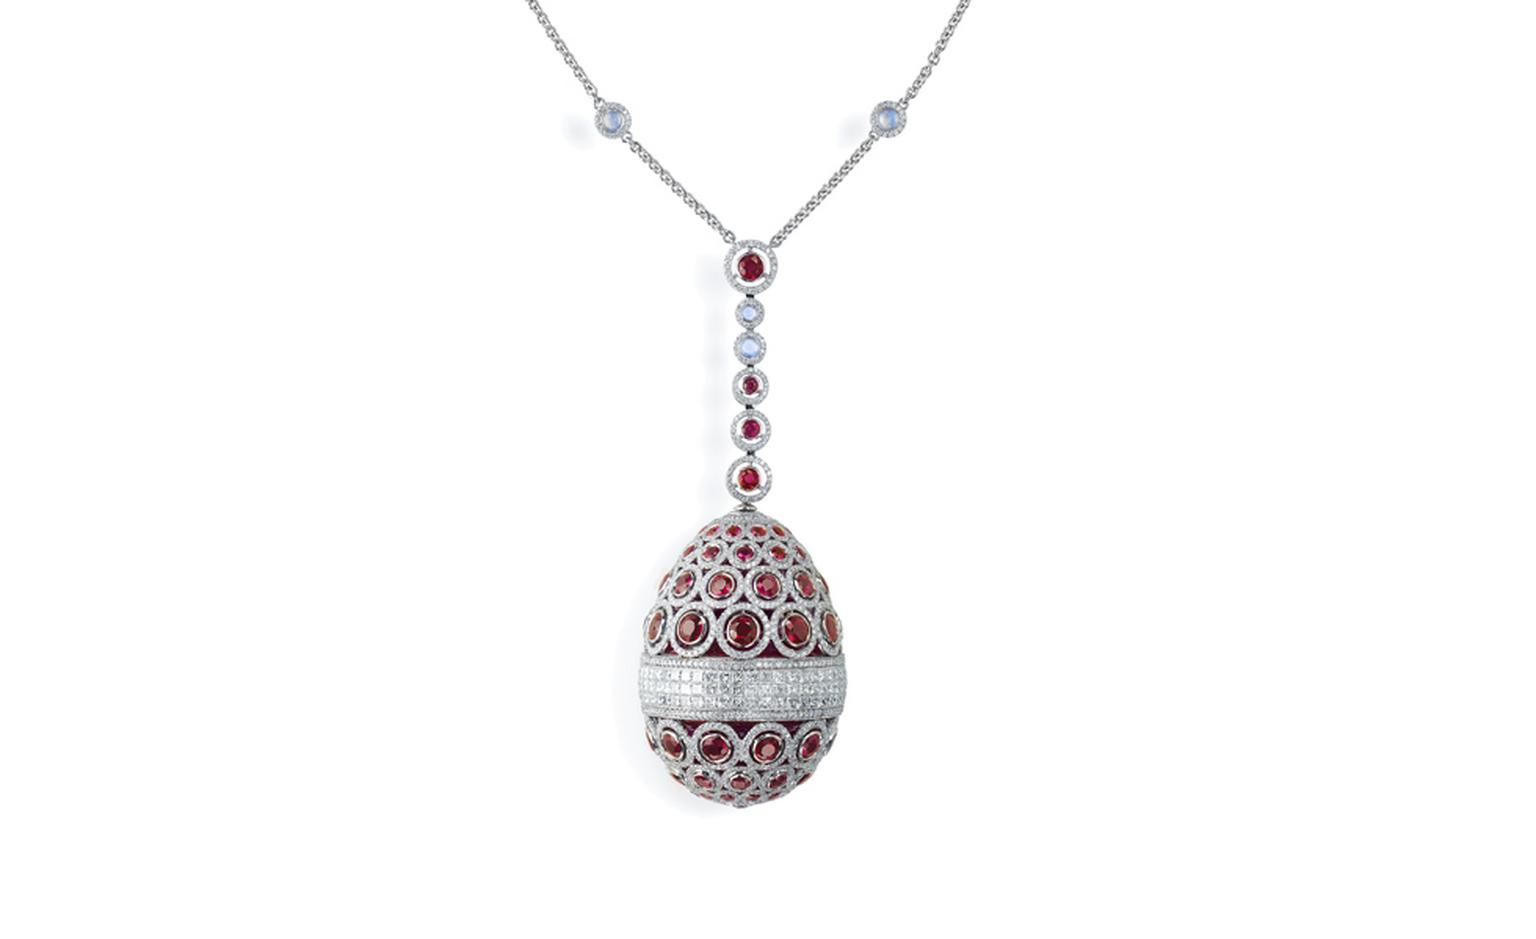 Fabergé. L’Oeuf Diaghilev (The Diaghilev Egg.) This piece is set with white gold and features 2012 stones including diamonds, rubies, shapphires and moonstones. POA